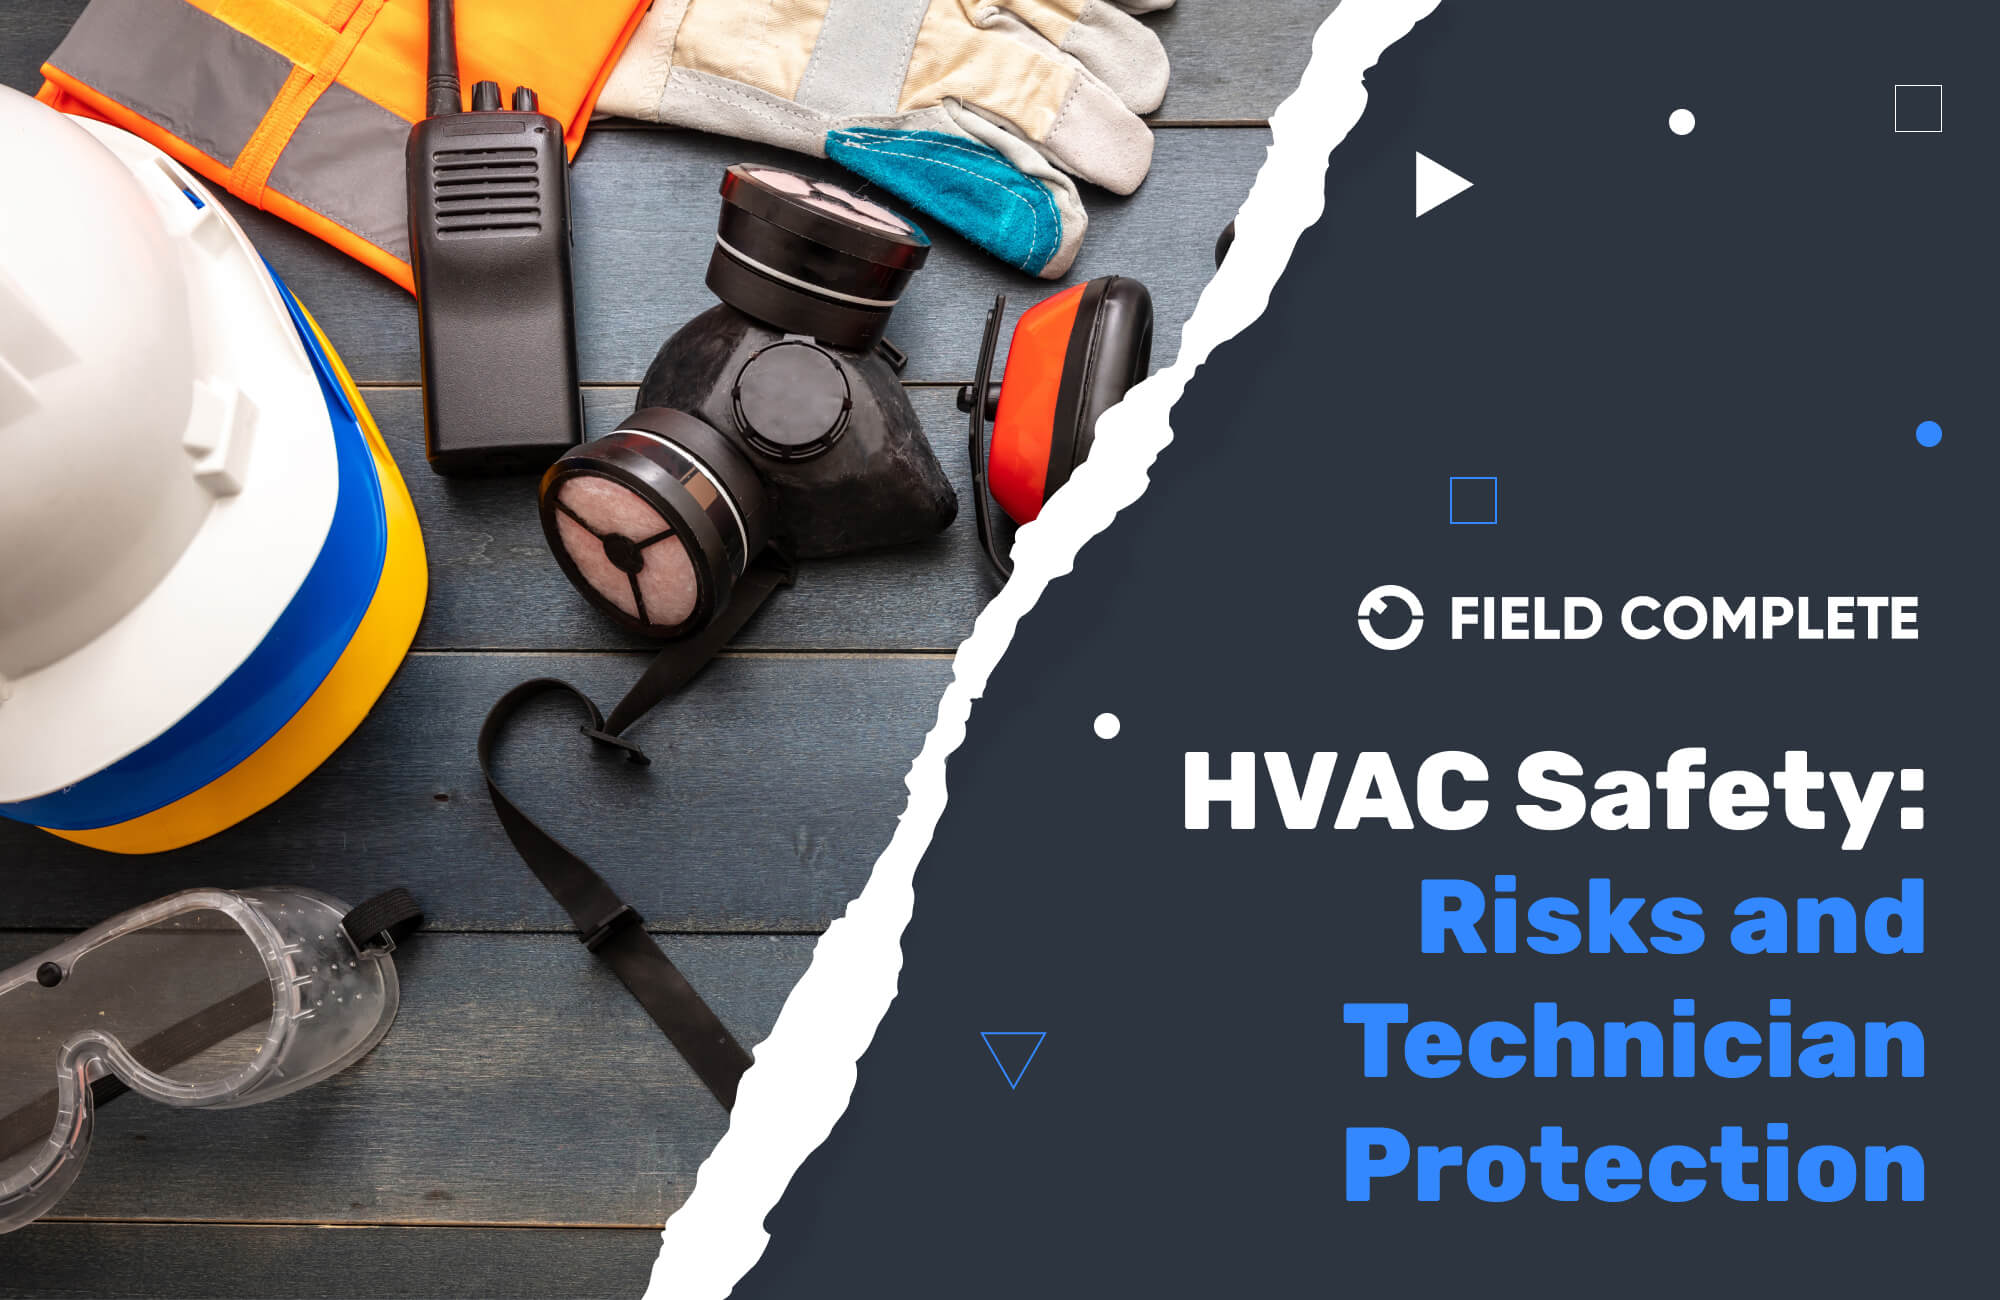 HVAC Safety: Risks and Technician Protection